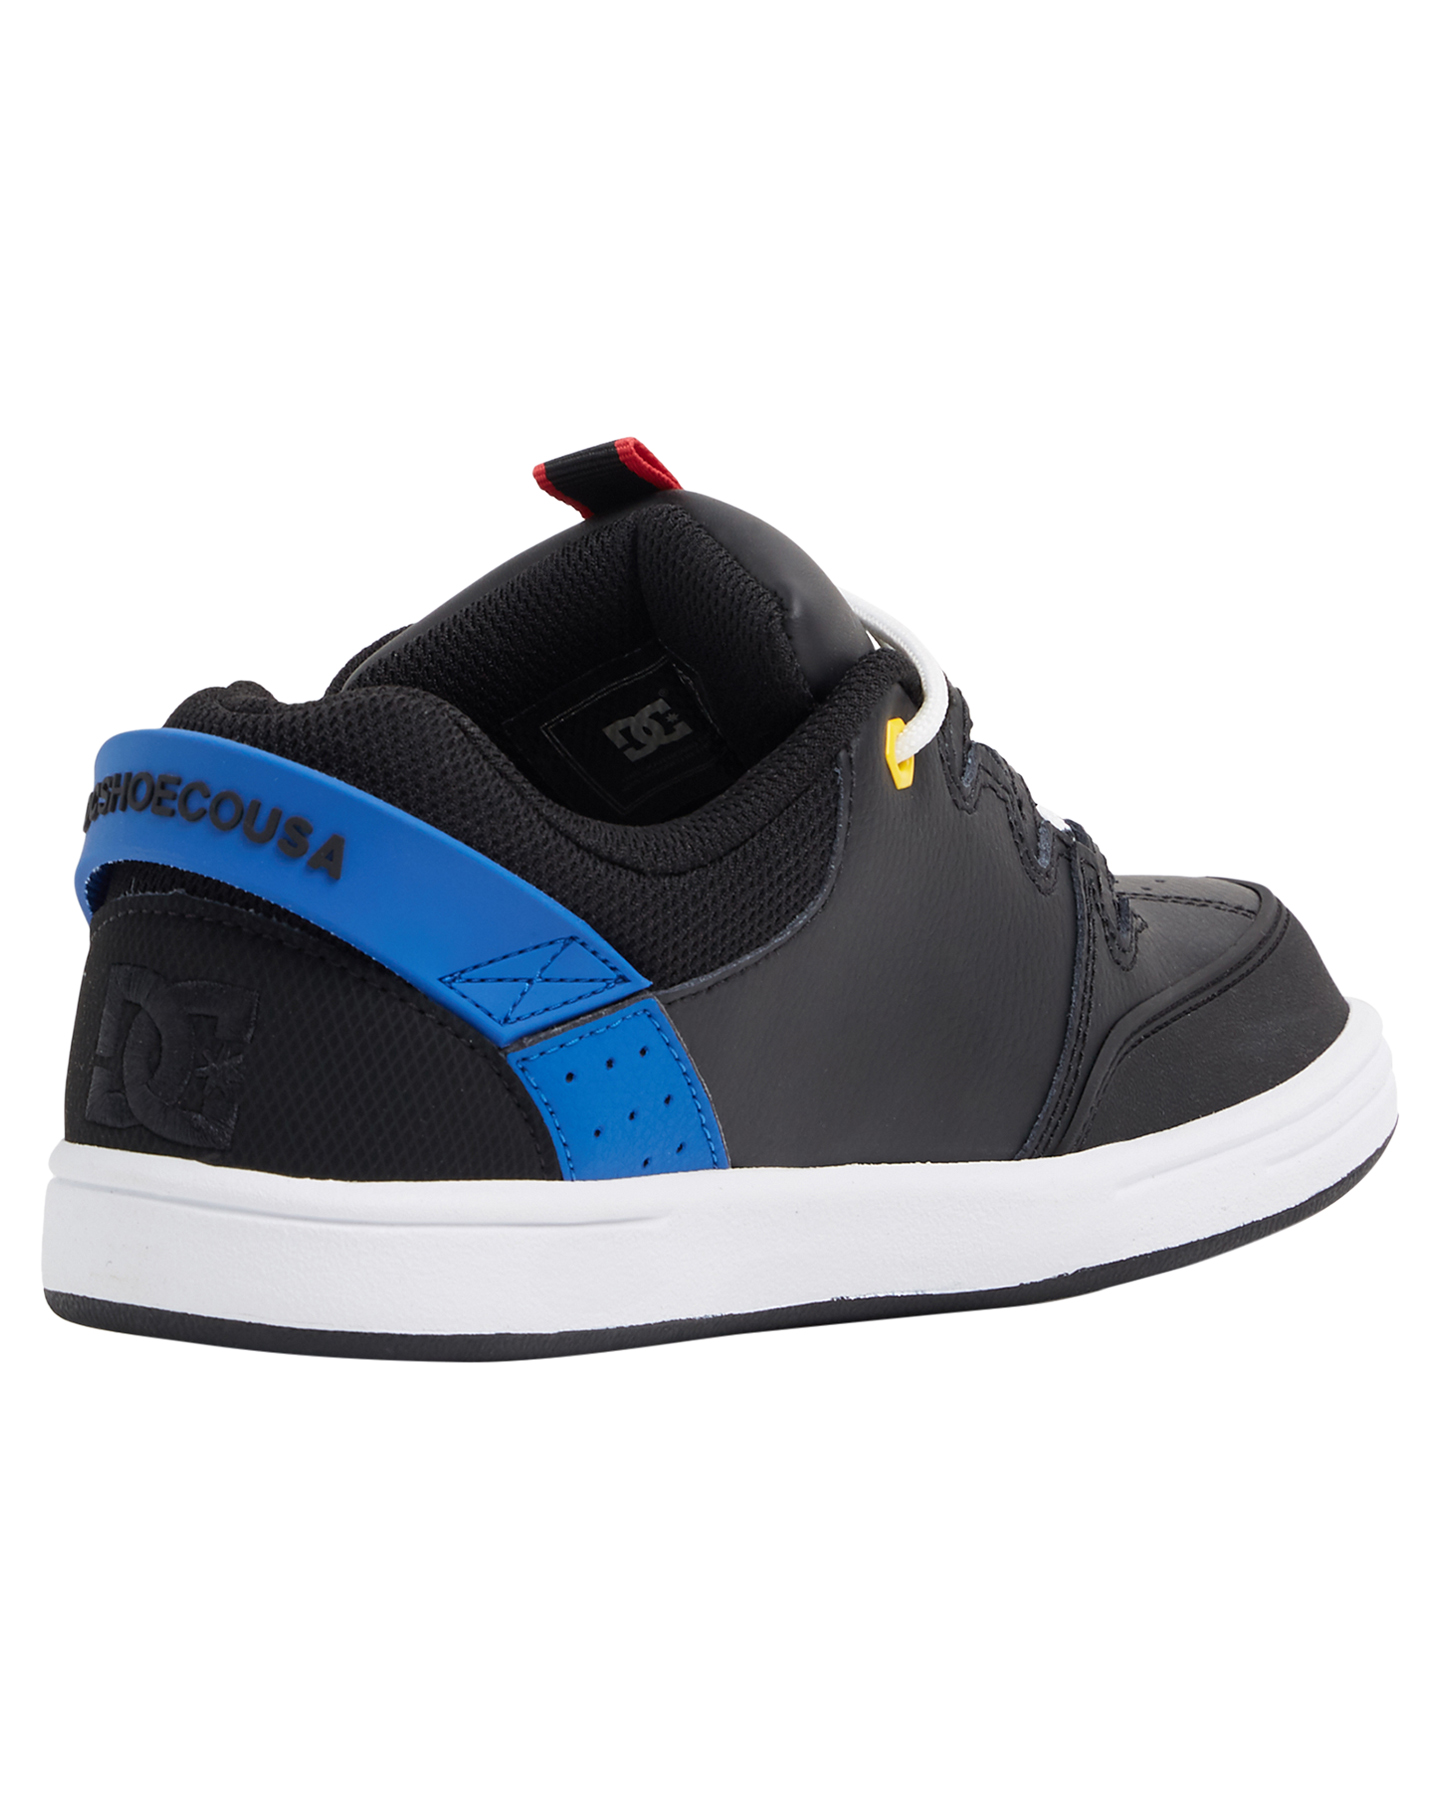 Dc Shoes Syntax Shoe - Youth - Black/Blue/Red | SurfStitch